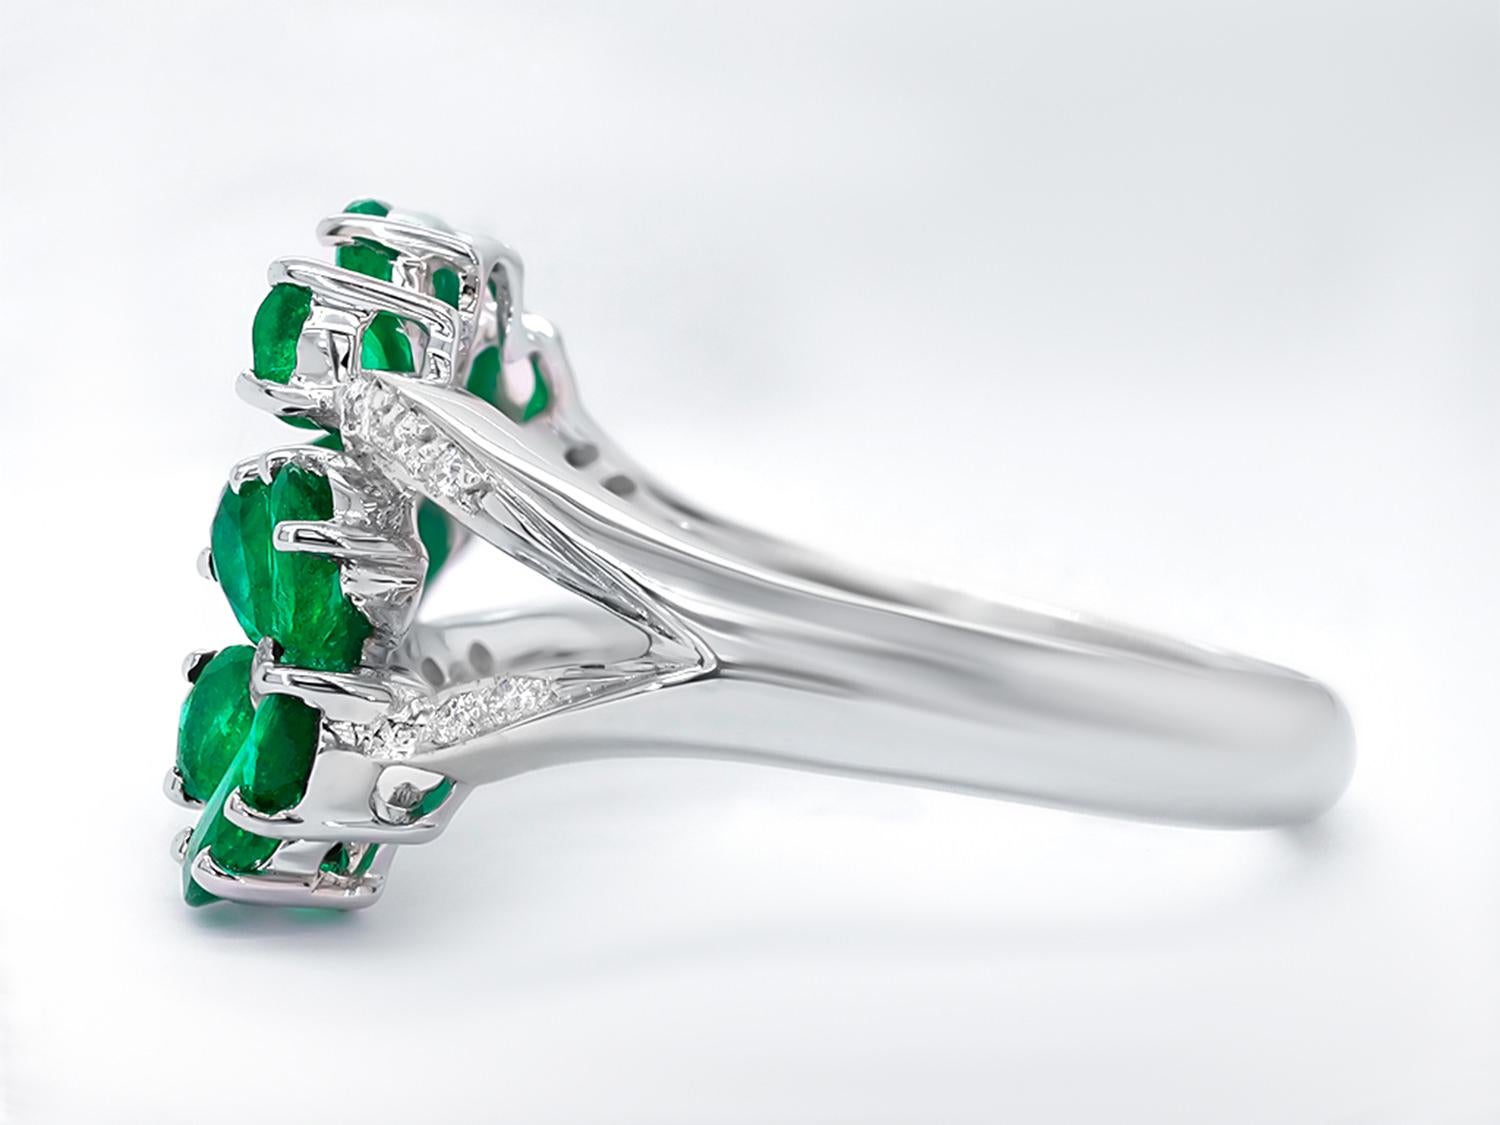 Emerald Flower Ring Diamond Setting 1.42 Carats 18K White Gold In Excellent Condition For Sale In Laguna Niguel, CA